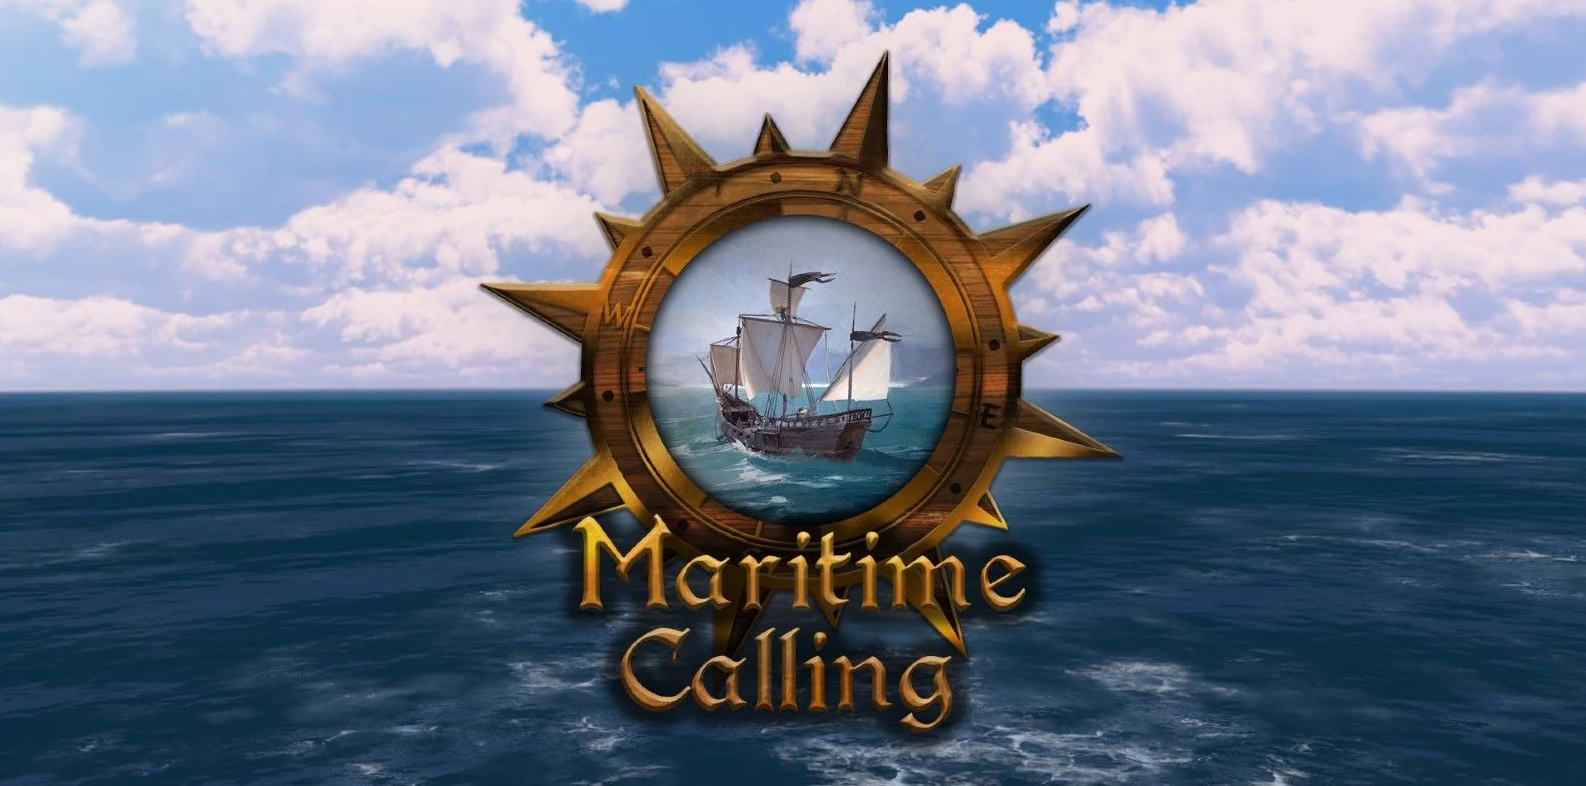 Maritime Calling download the new version for apple